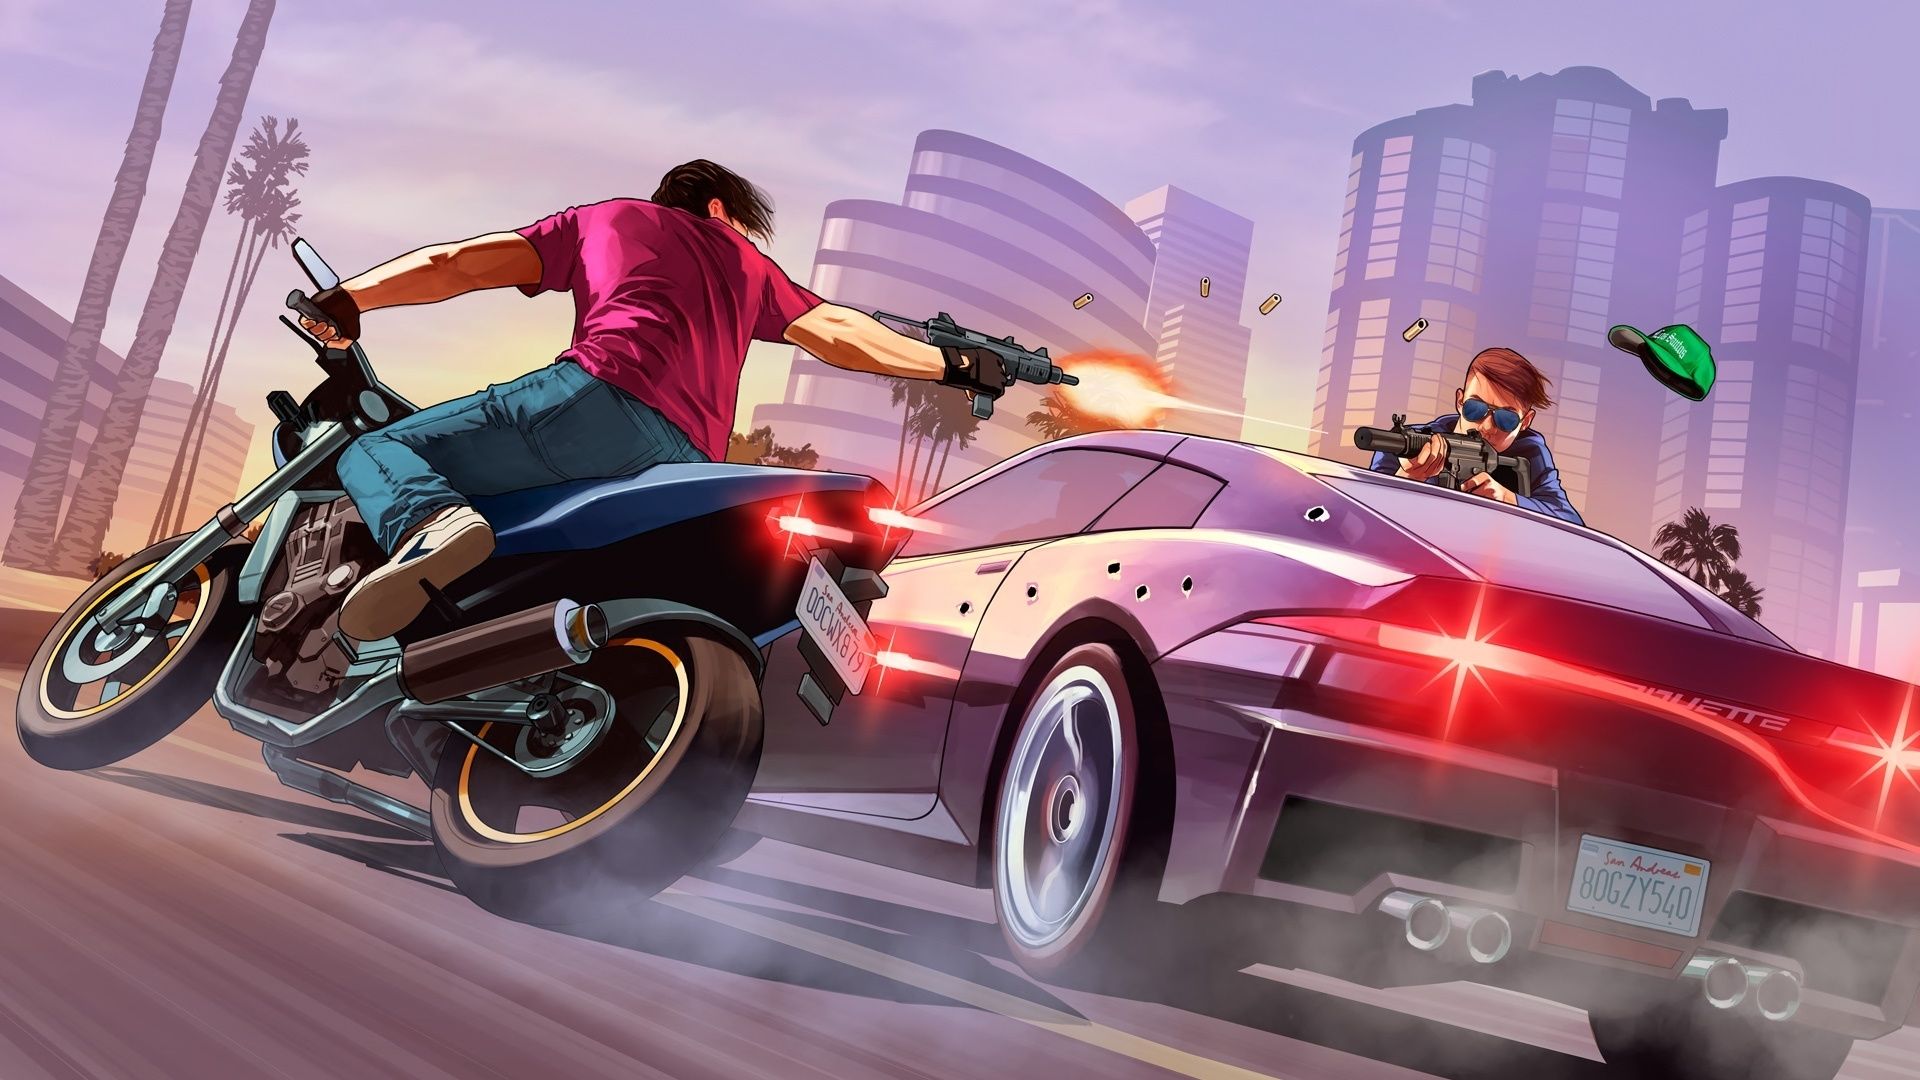 Grand Theft Auto 5 And GTA Online Wallpaper